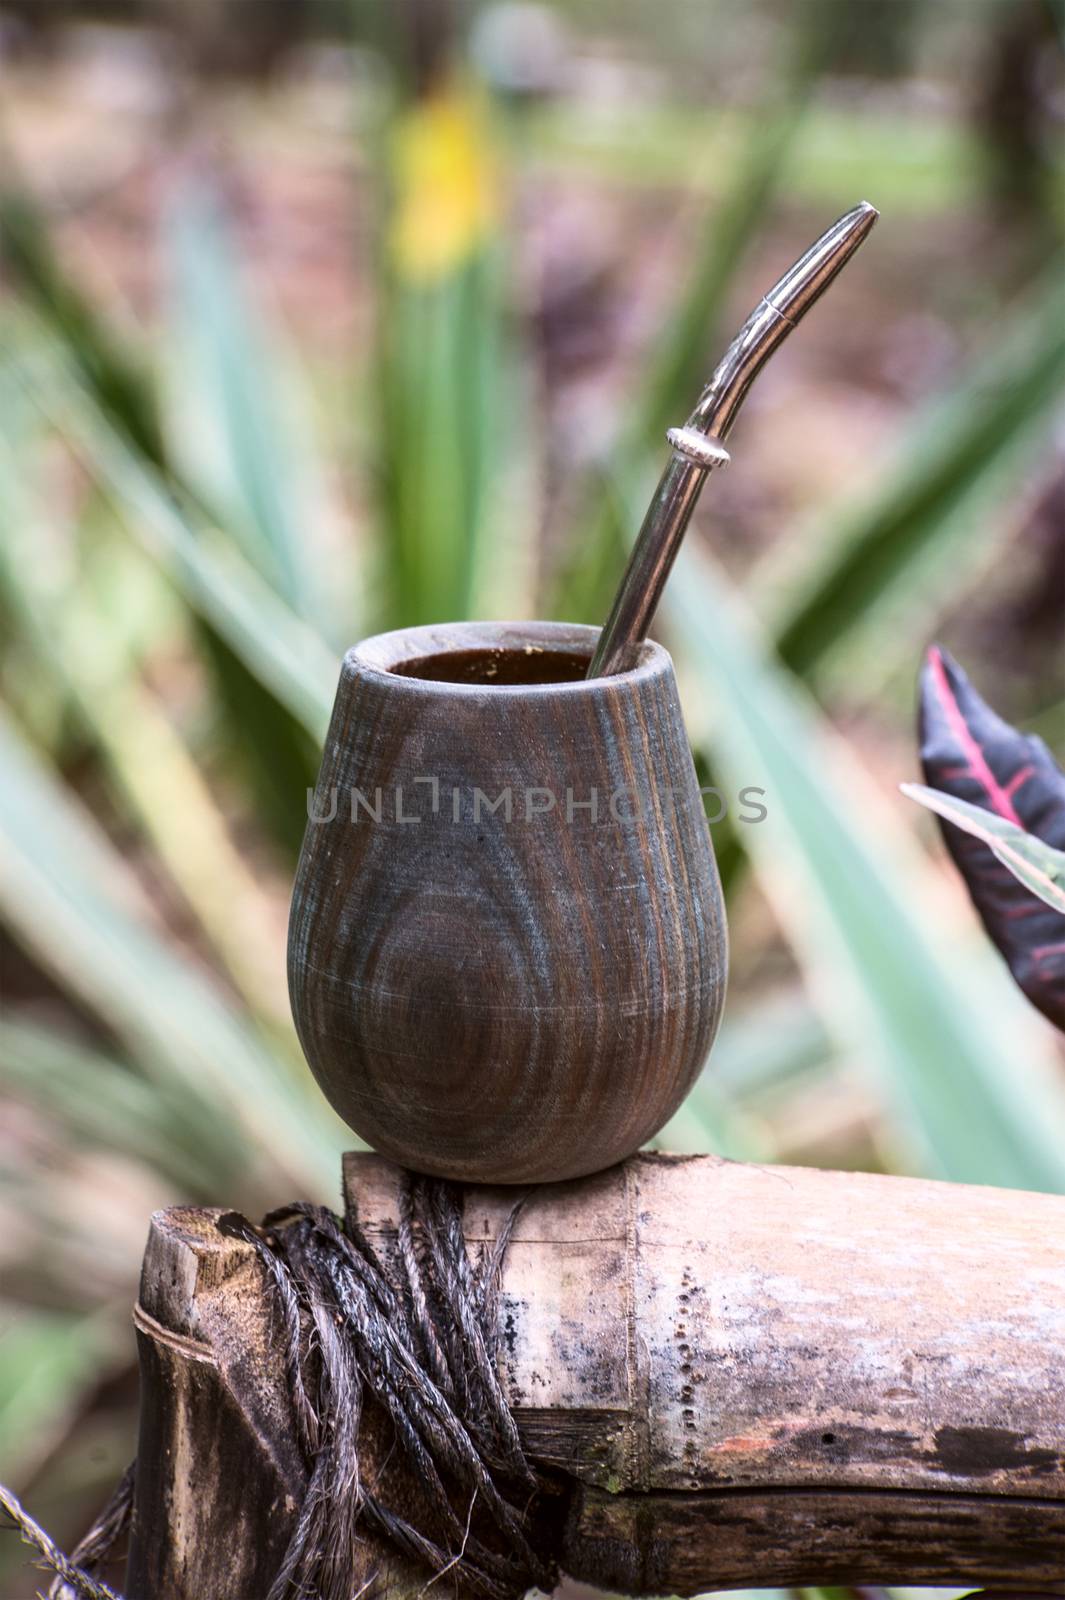 Close up of calabash cup with spill of yerba mate tea and straw. Yerba mate is a very typical drink in Argentina, Uruguay the South of Brazil and Paraguay.